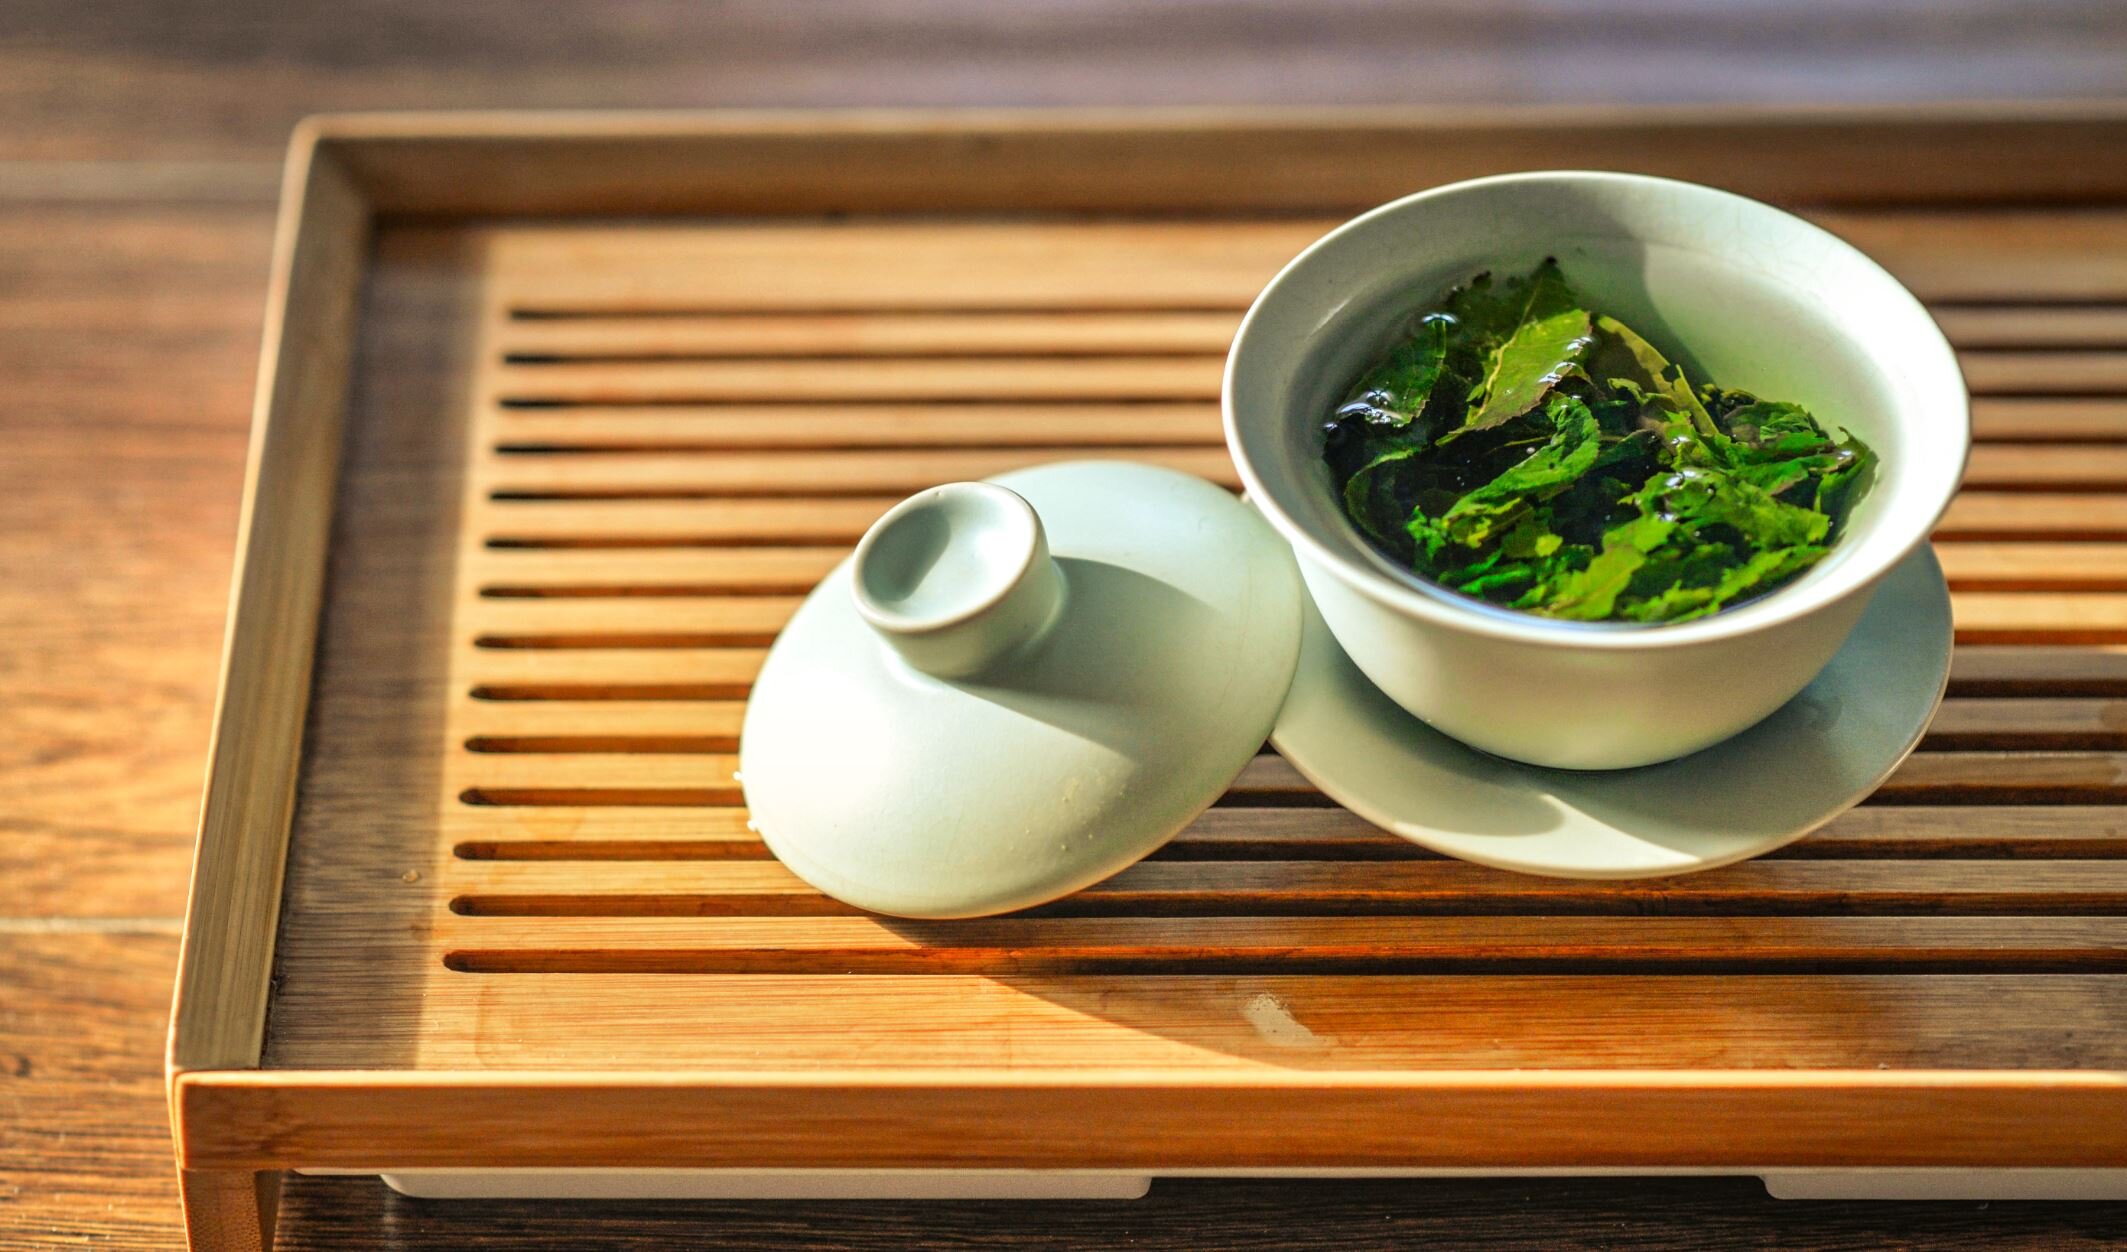 Green tea might be better for your health than other types of tea - Image Credit: Jia Ye via Unsplash - HDR tune by Universal-Sci